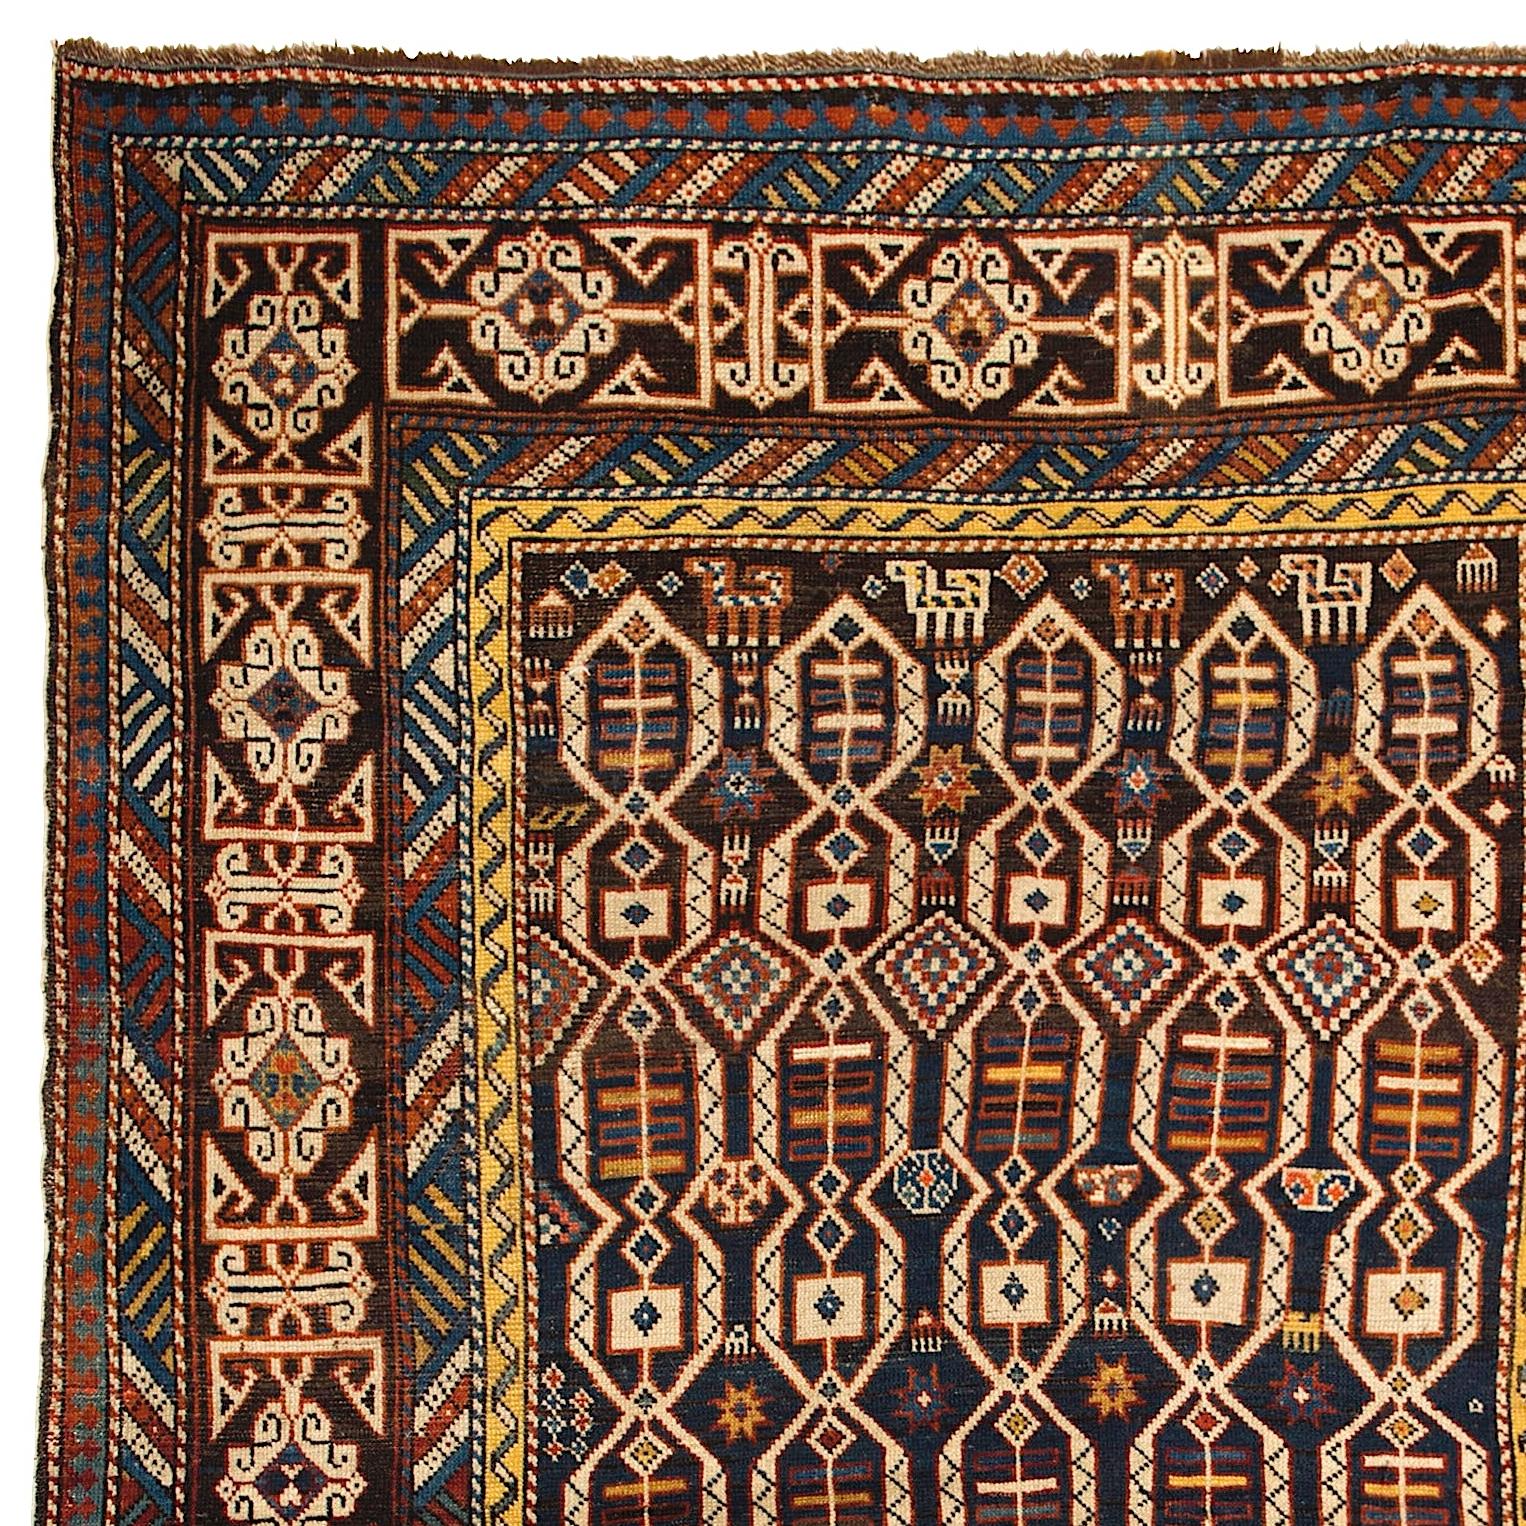 Antique Caucasian Kuba Shirvan rug, ca 1880. 
Kufic border, animals on black ground. 
Finely hand-knotted with even medium wool pile on wool foundation. Very good condition. Sturdy and as clean as a brand new rug (deep washed professionally).
Size: